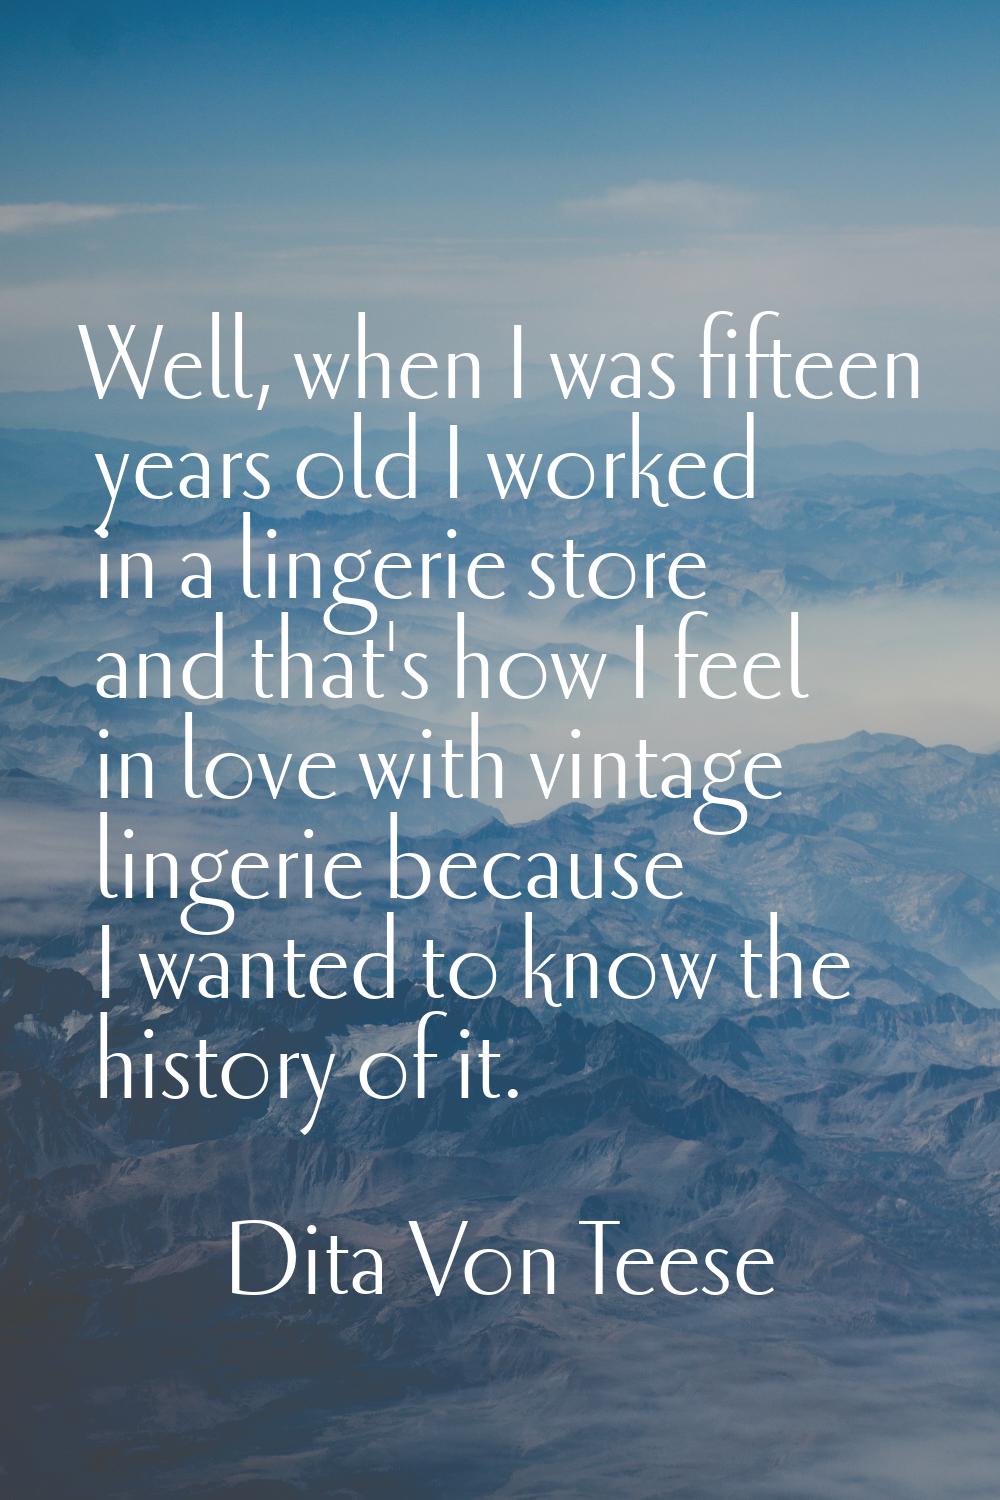 Well, when I was fifteen years old I worked in a lingerie store and that's how I feel in love with 